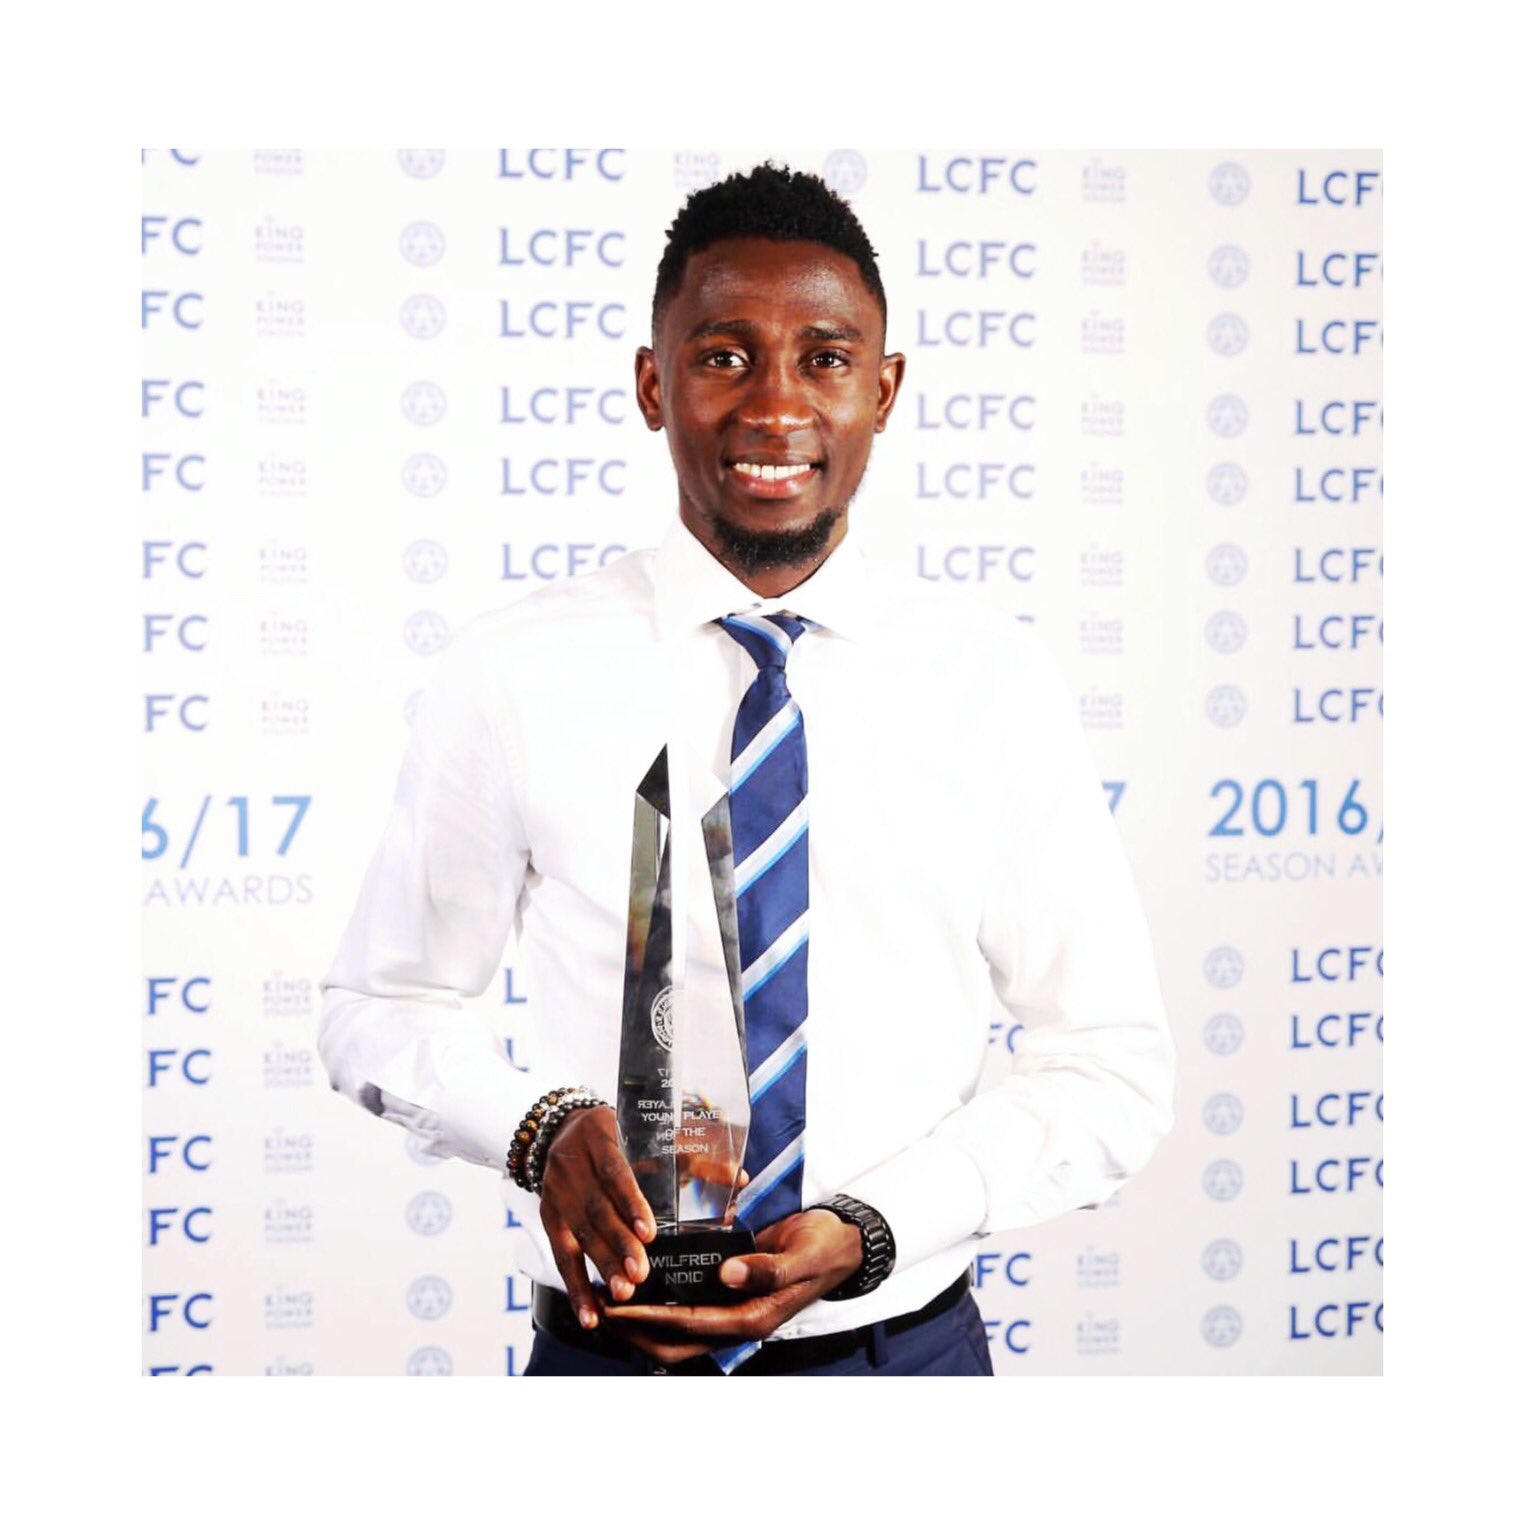 Ndidi Leicester City Young player of the Year award in 2017.